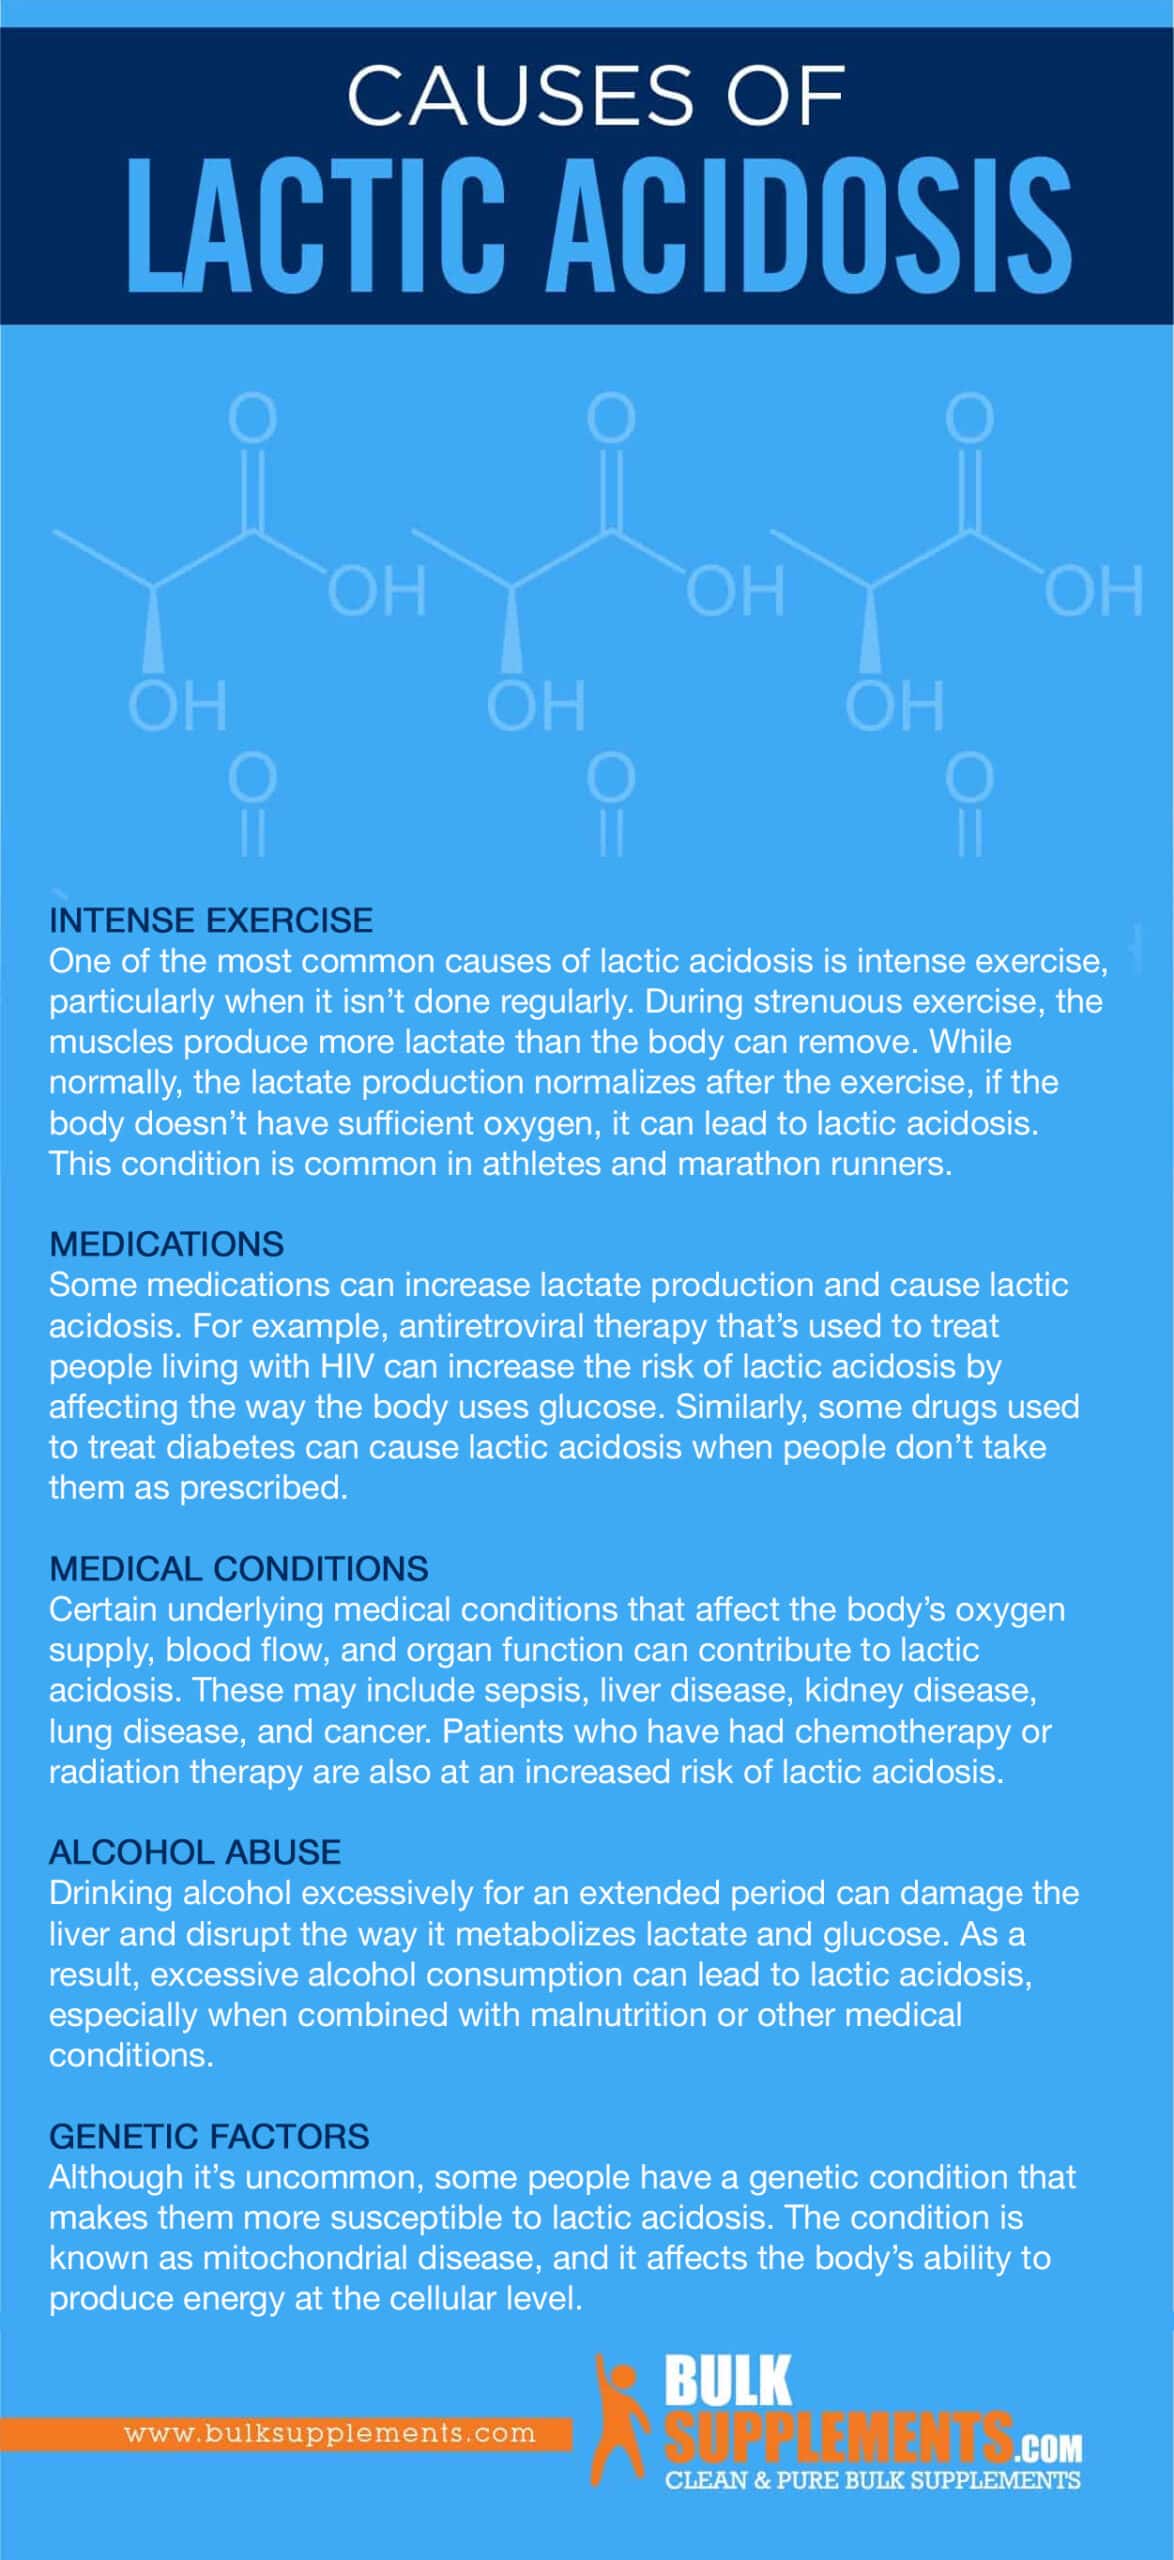 Causes of Lactic Acidosis